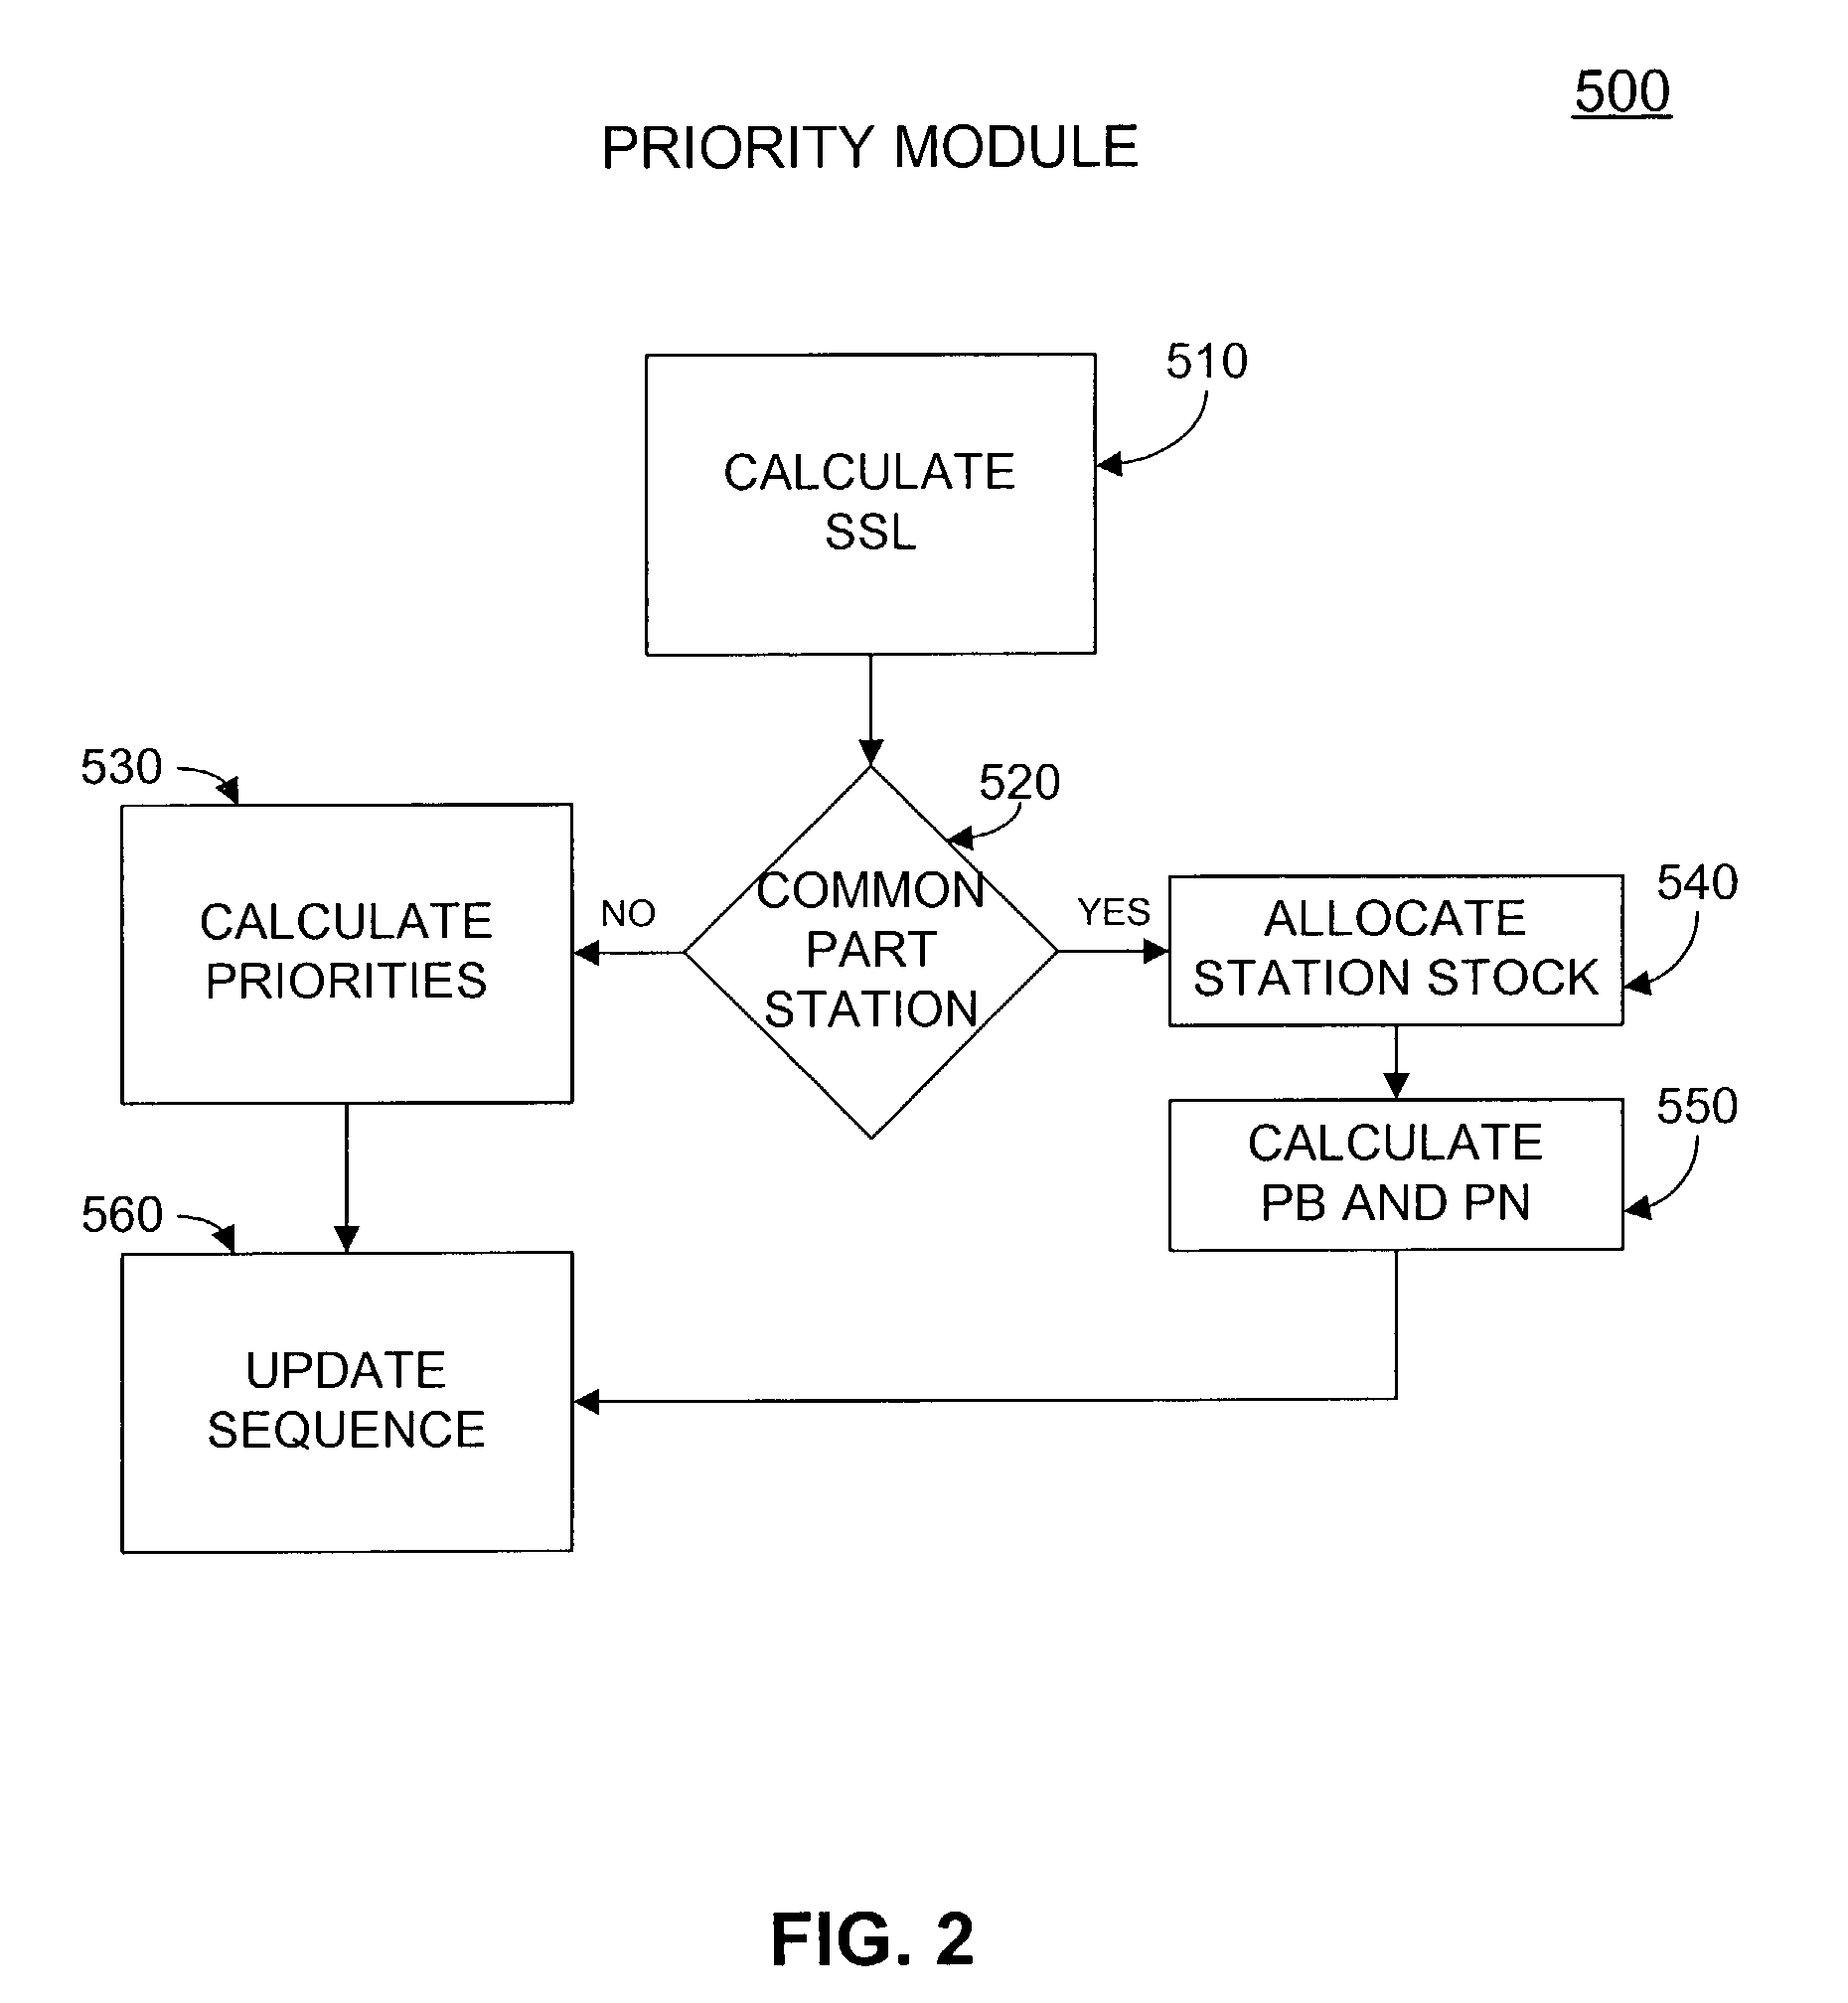 Constraint-based production planning and scheduling